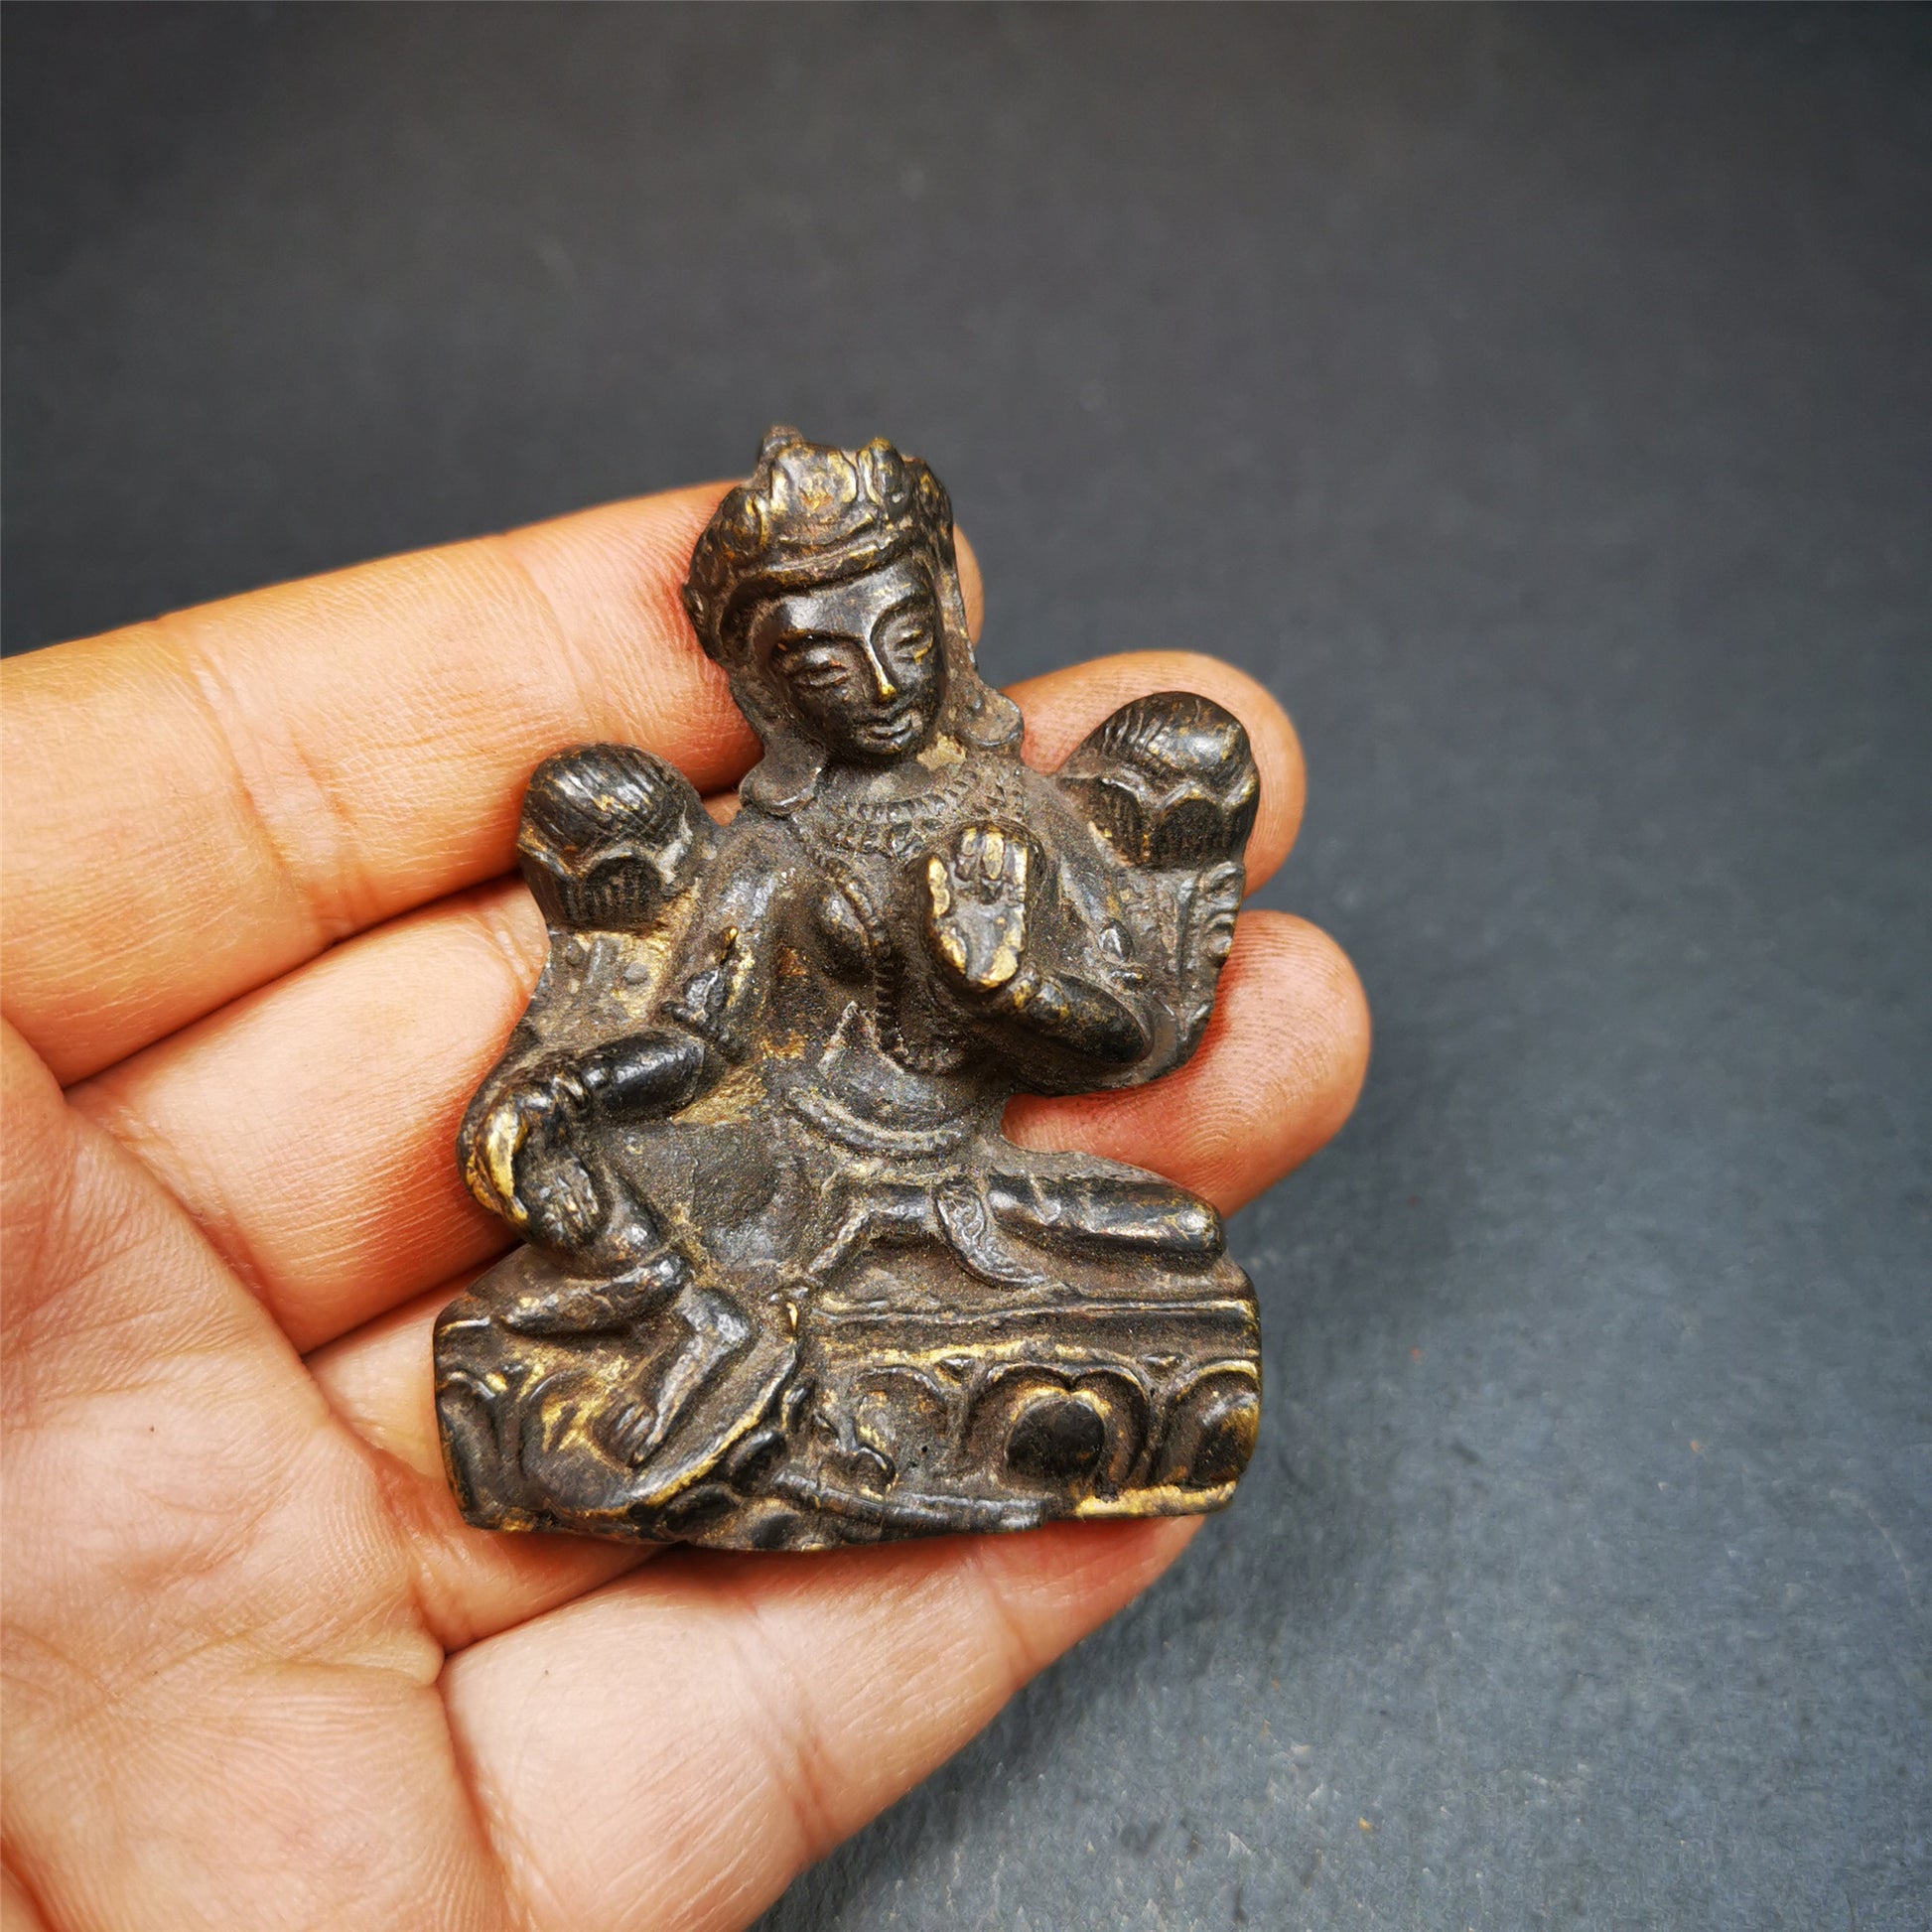 This is collect from Samyé Monastray, the first monastery in Tibet,and important Nyingma monsatery,about 60 years old. It's an old-fashioned green tara statue and painted with mineral pigments. Green Tara is associated with enlightened activity and active compassion, and is the manifestation from which all her other forms emanate.